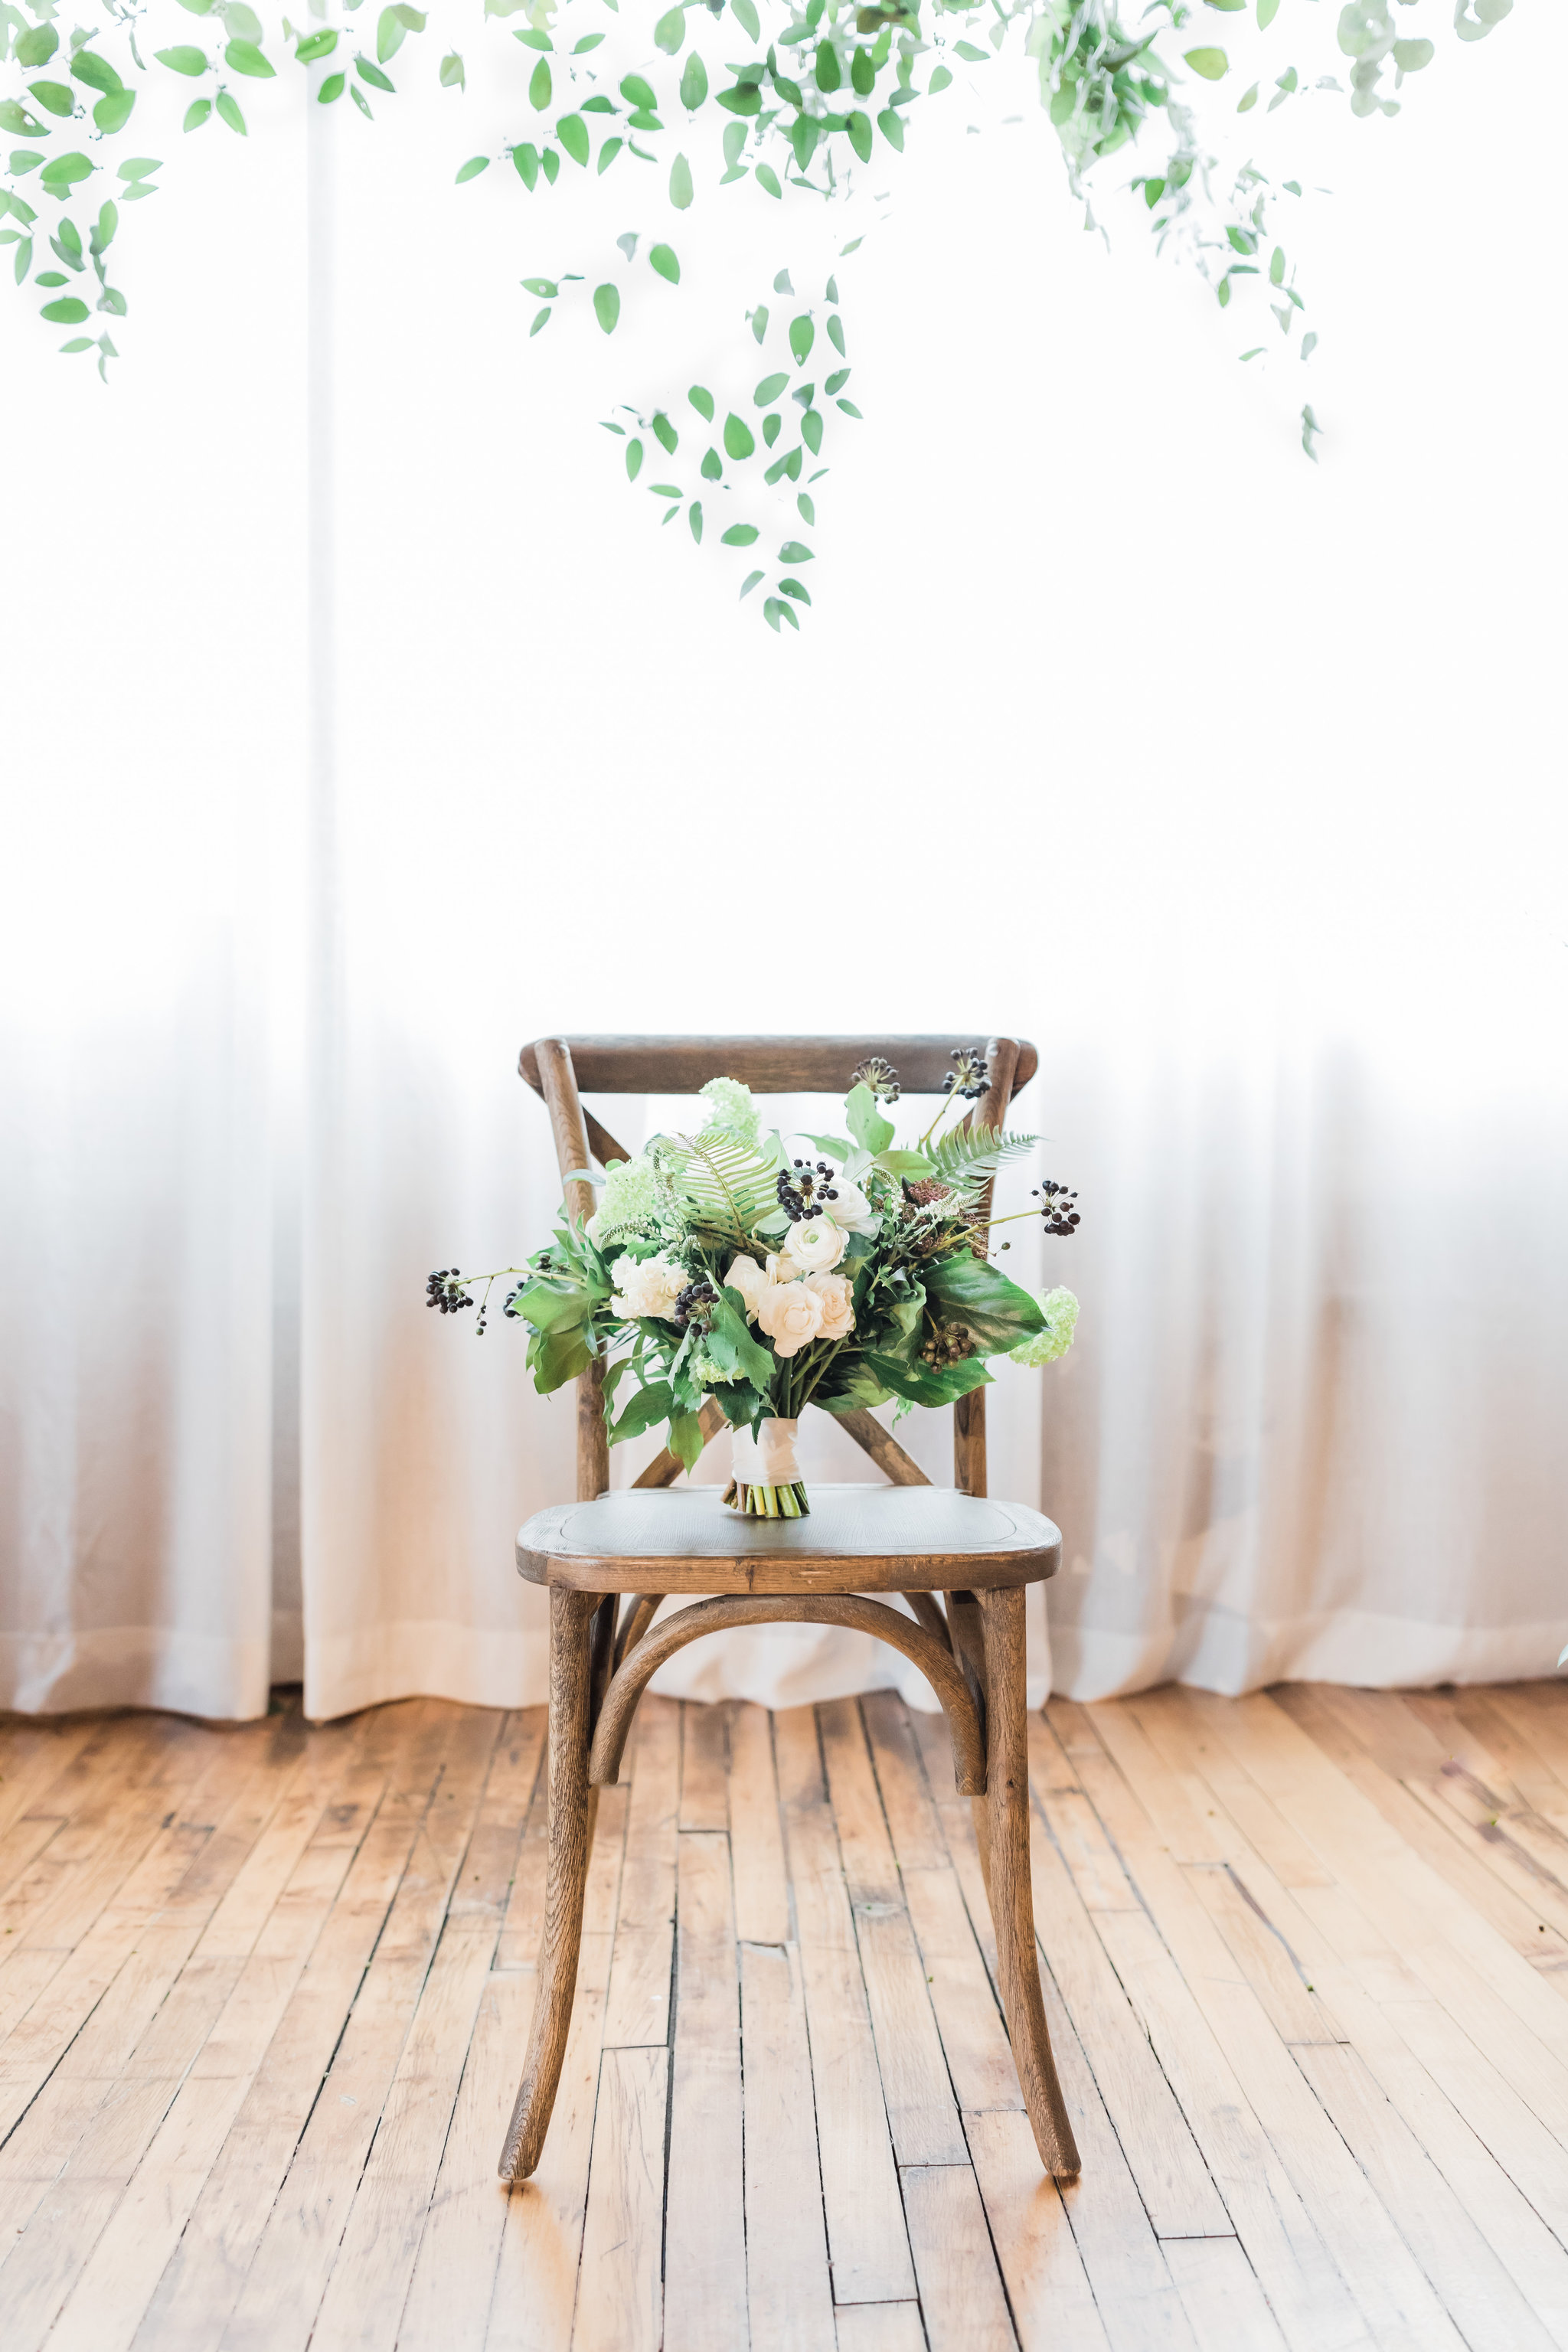 Green and white winter wedding bouquet on chair.